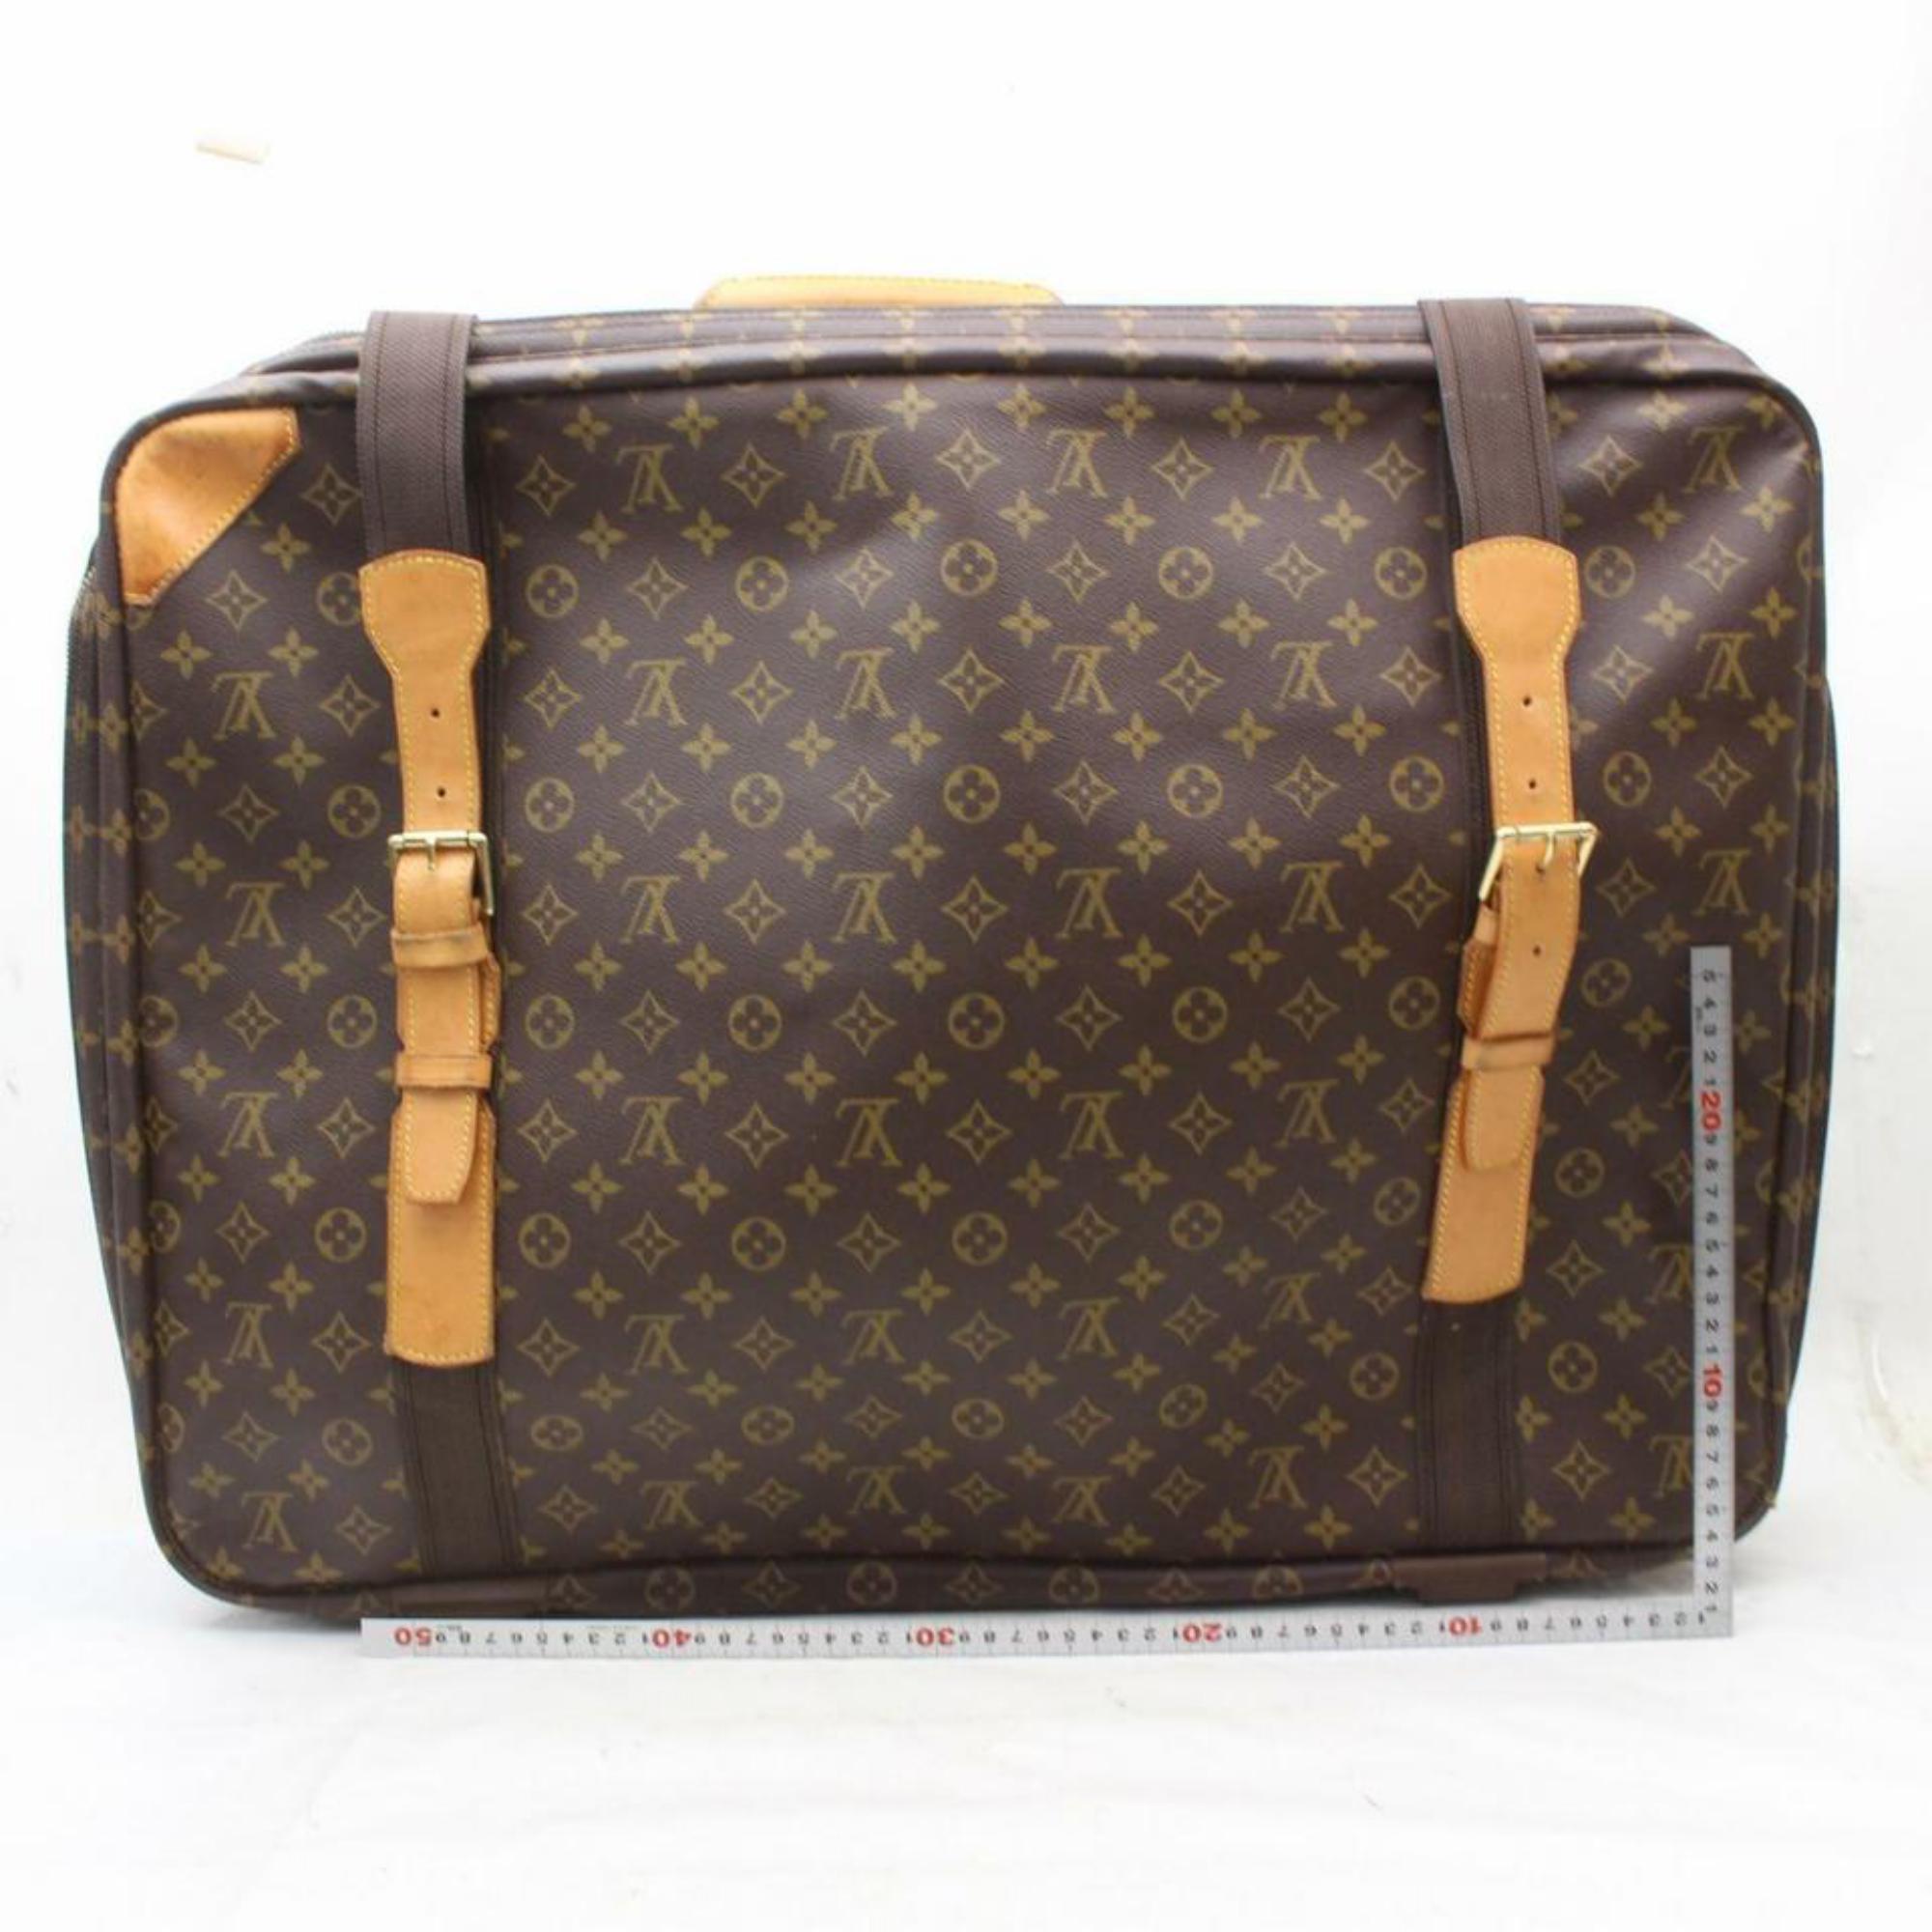 Women's Louis Vuitton Large Satellite 65 Suitcase Luggage 870108 Brown Canvas Travel Bag For Sale